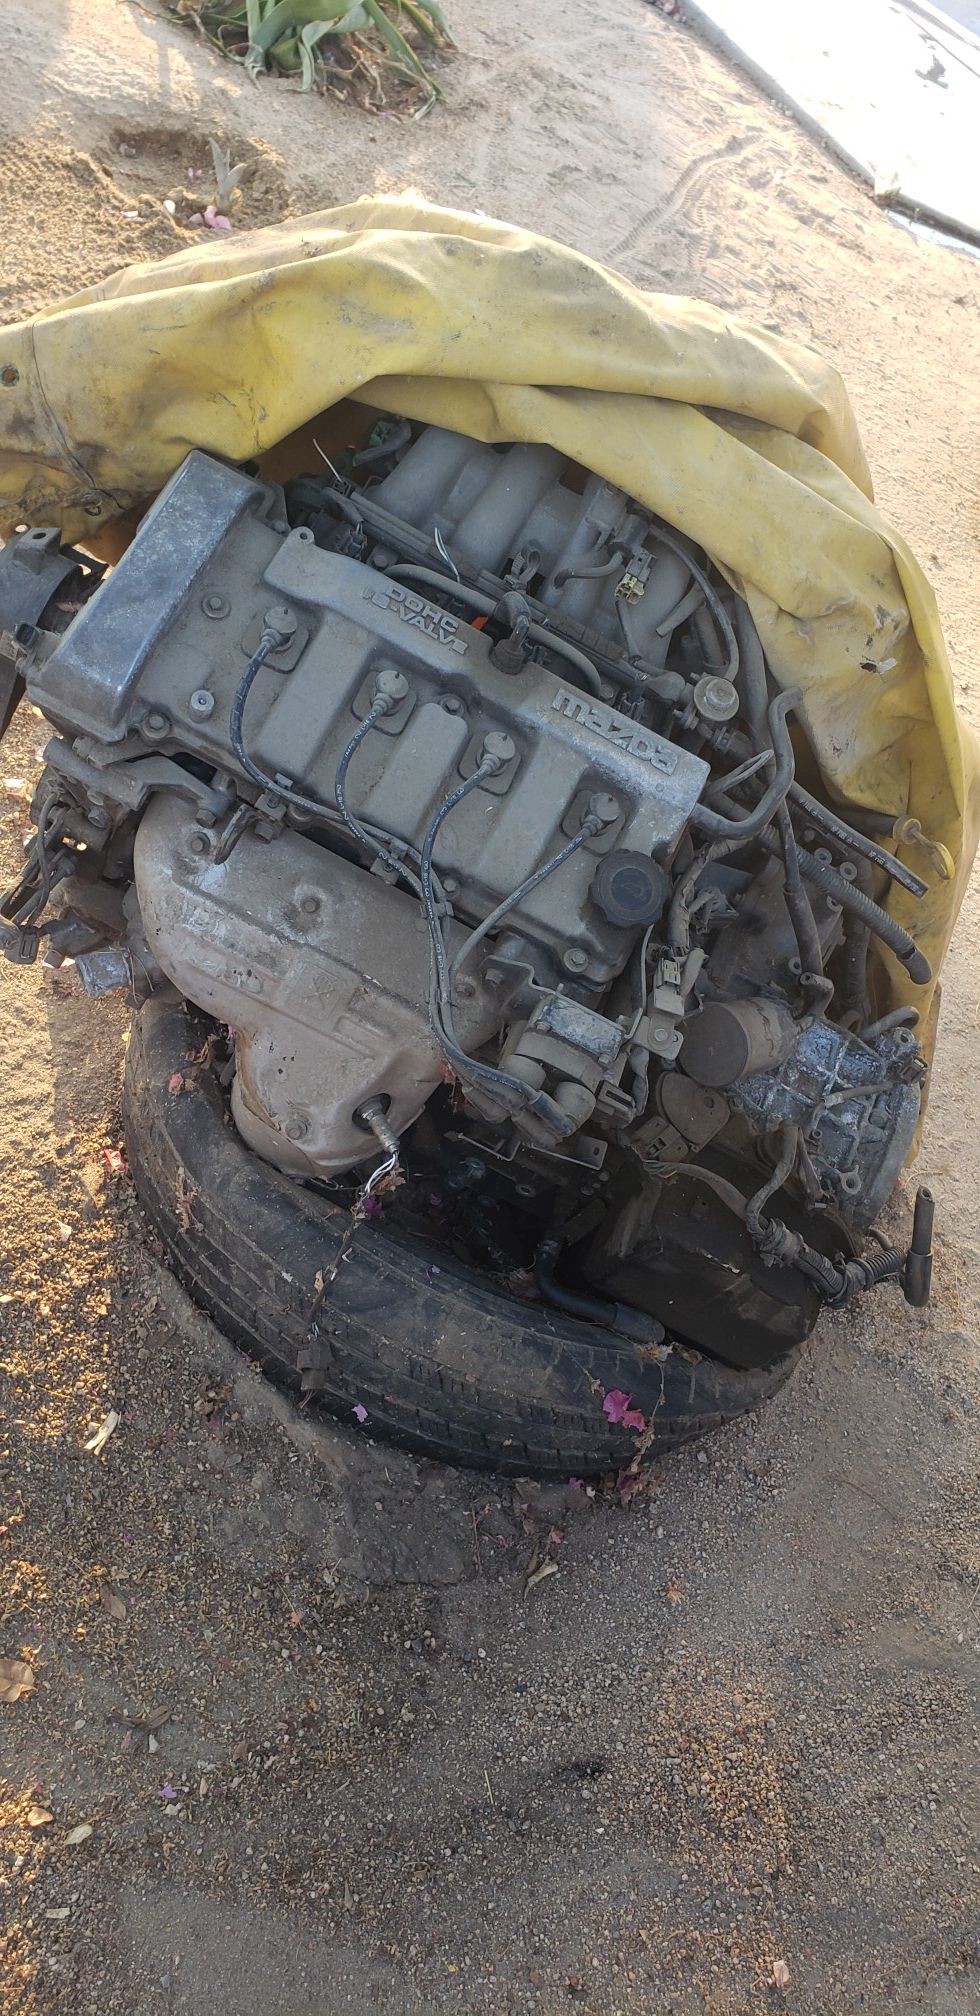 97-02 Mazda 626 engine and transmission, good known